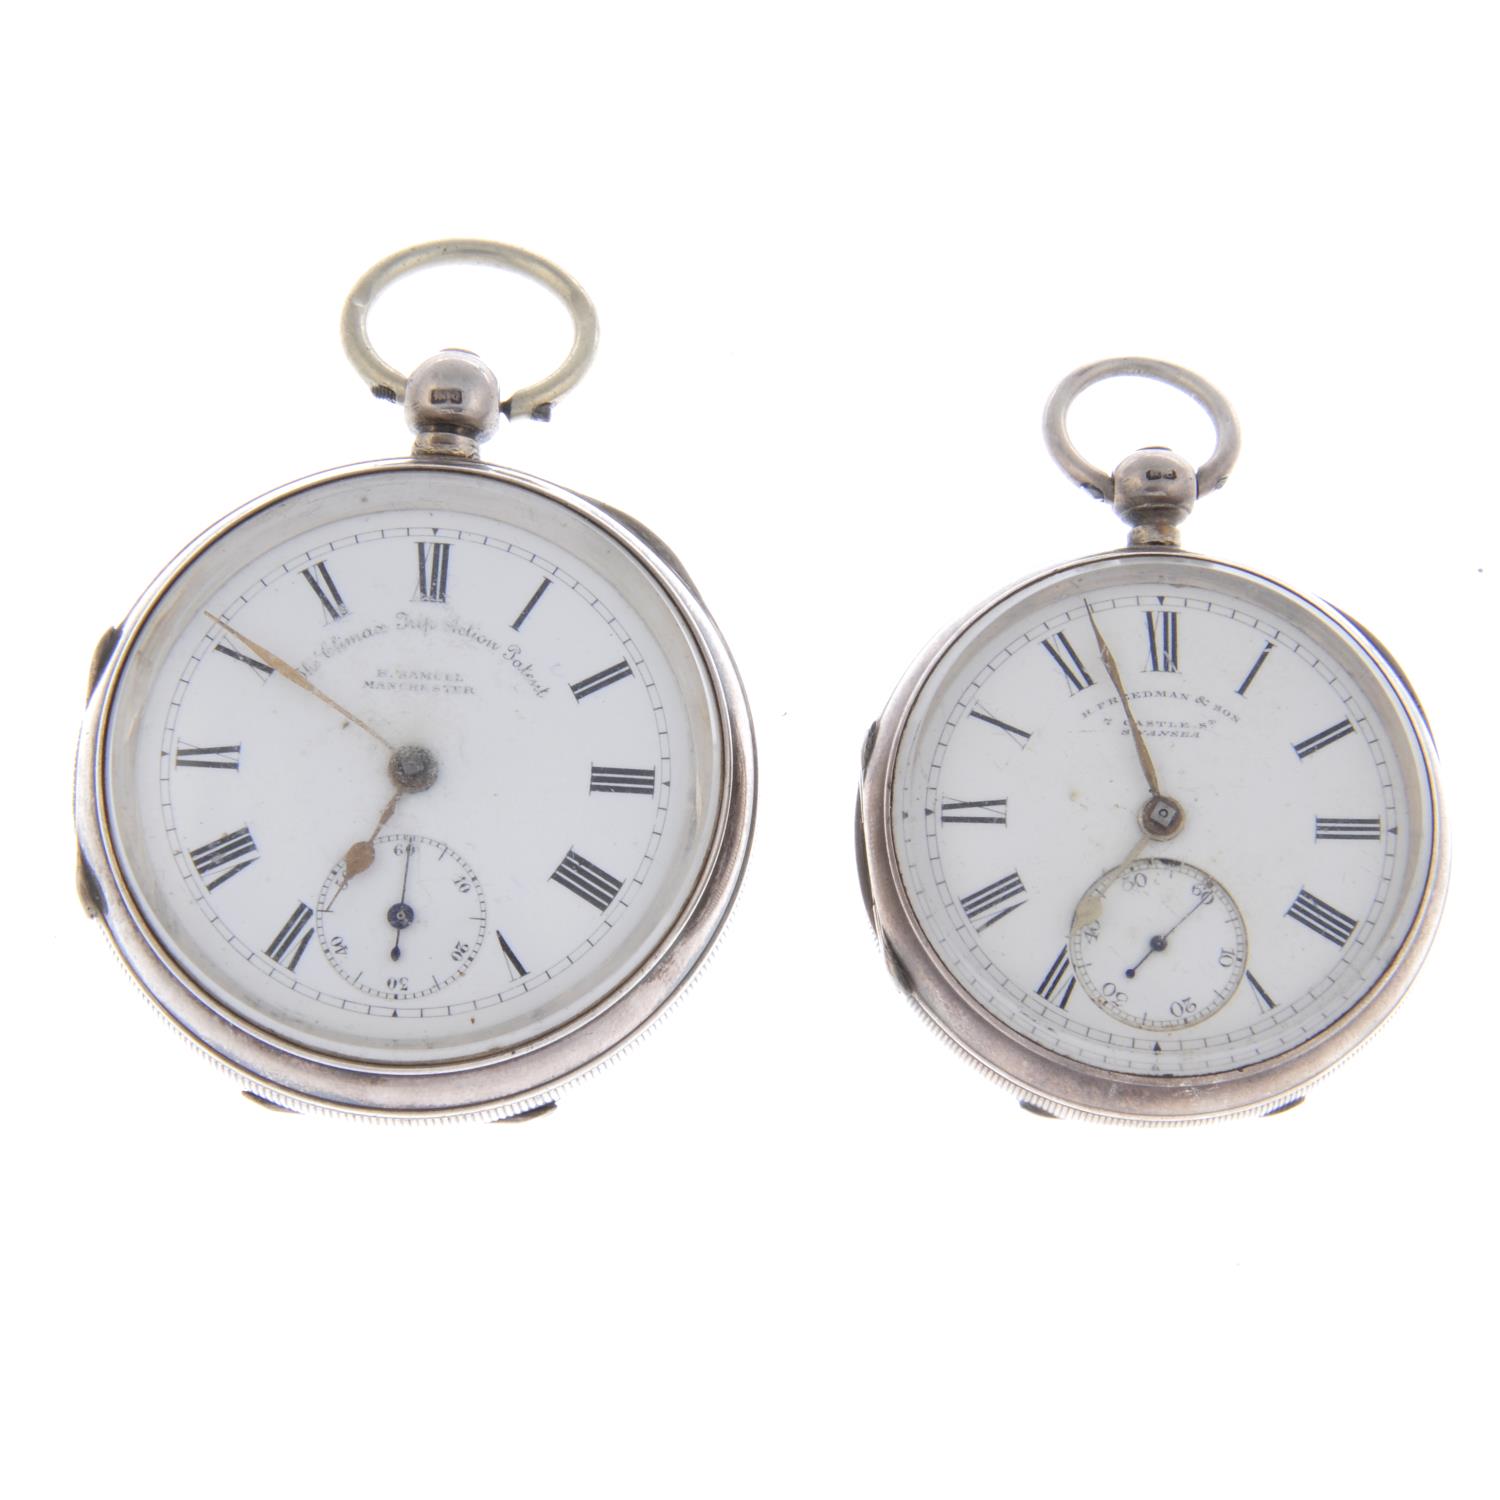 An open face pocket watch by E Wise. - Image 3 of 4